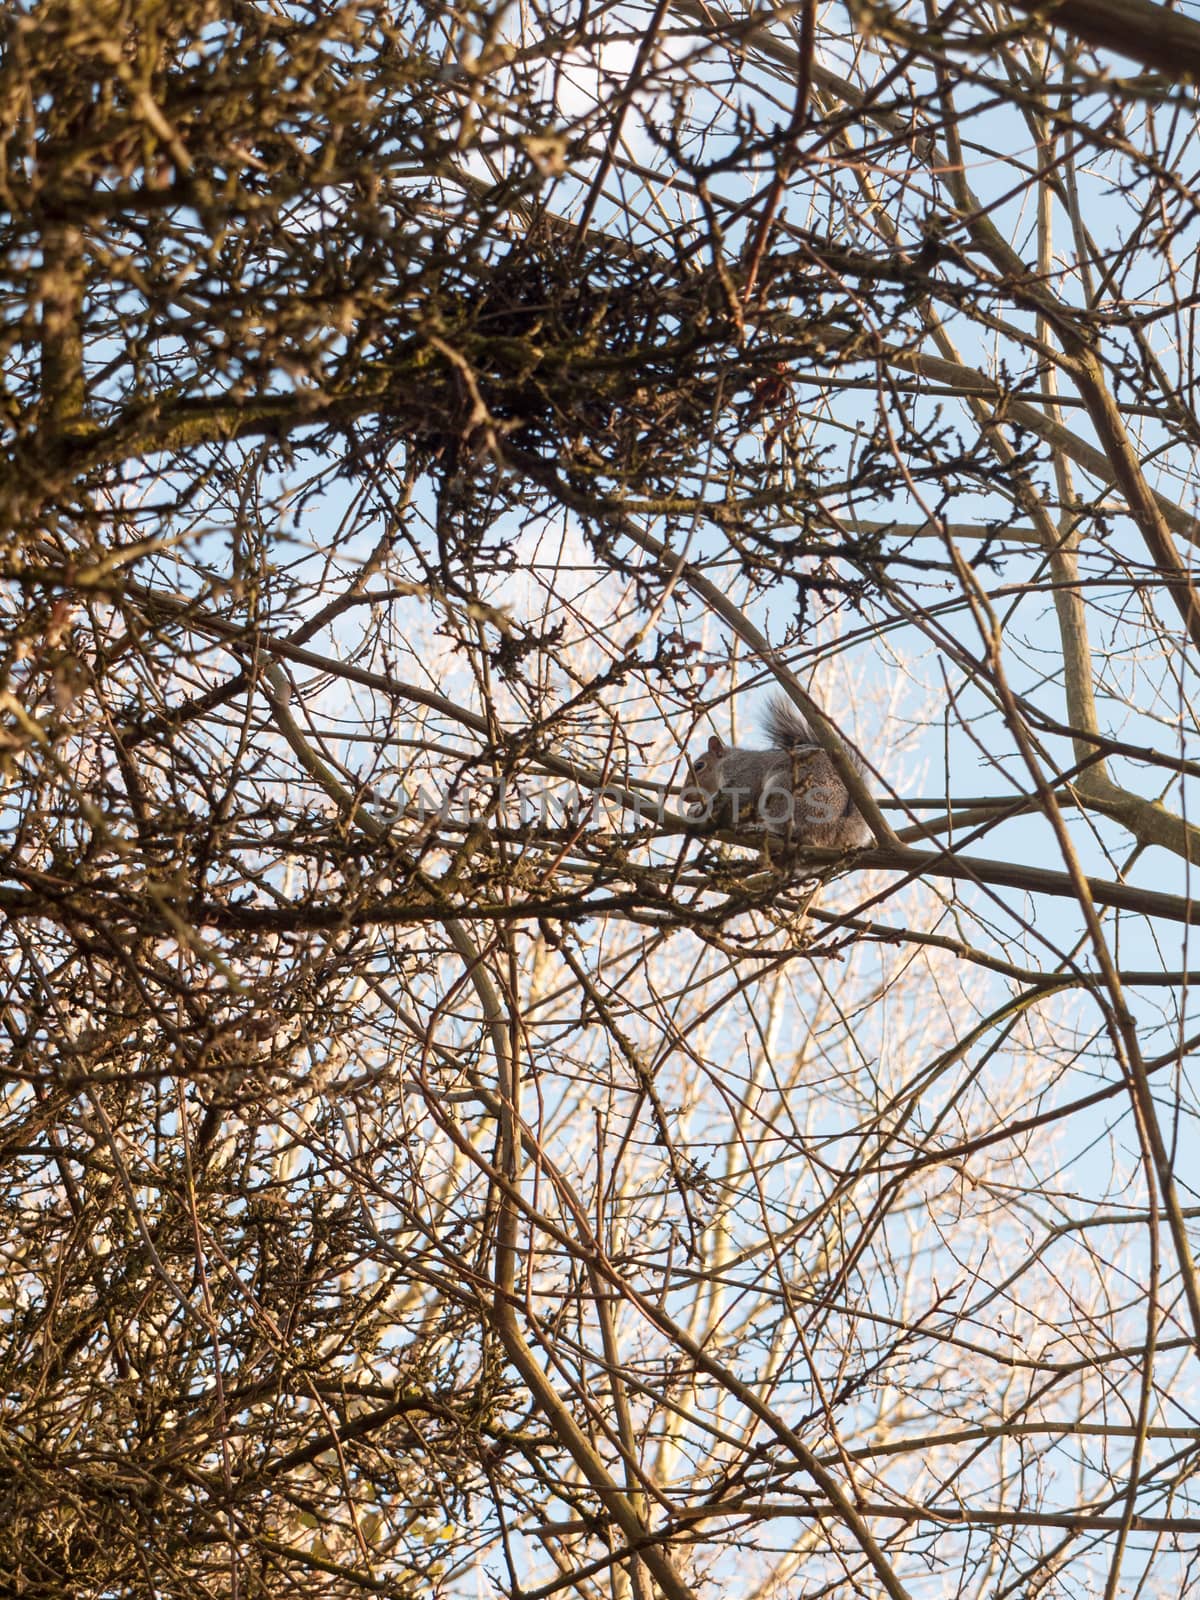 grey squirrel up in tree canopy branches eating; essex; england; uk